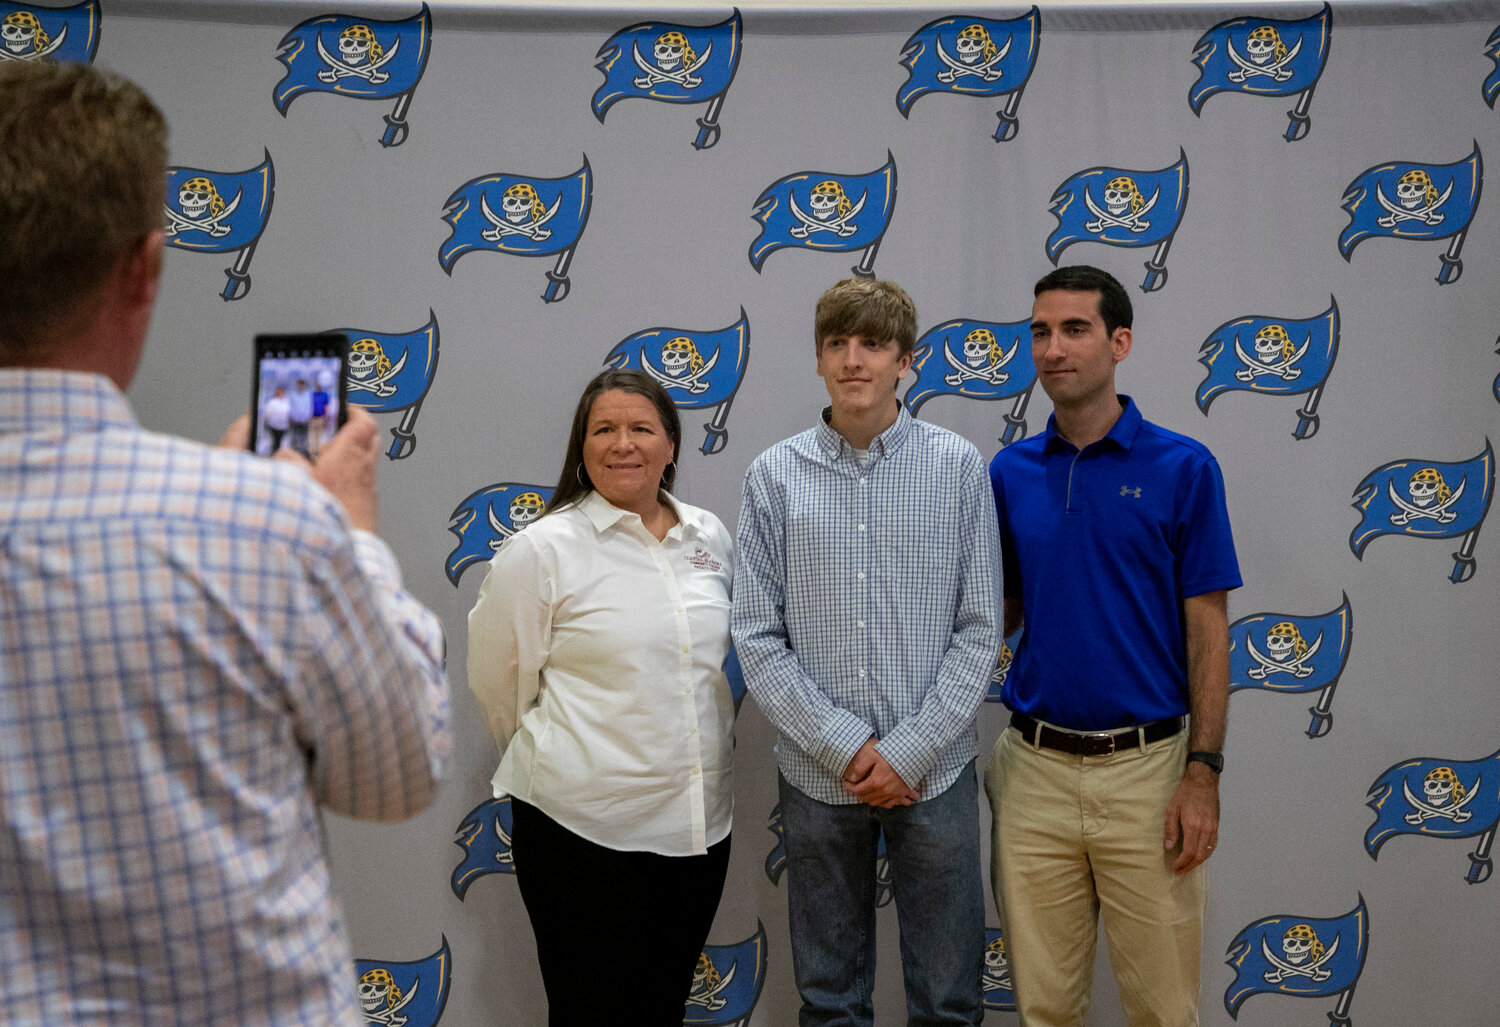 Pirate cross country runner Zachery Wyatt was joined by family and Fairhope cross country coach Justin Parmer at the signing ceremony Monday, April 17, where 17 student-athletes put pen to paper on their National Letters of Intent. Wyatt will represent the Pirates with Coastal Alabama at the next level.